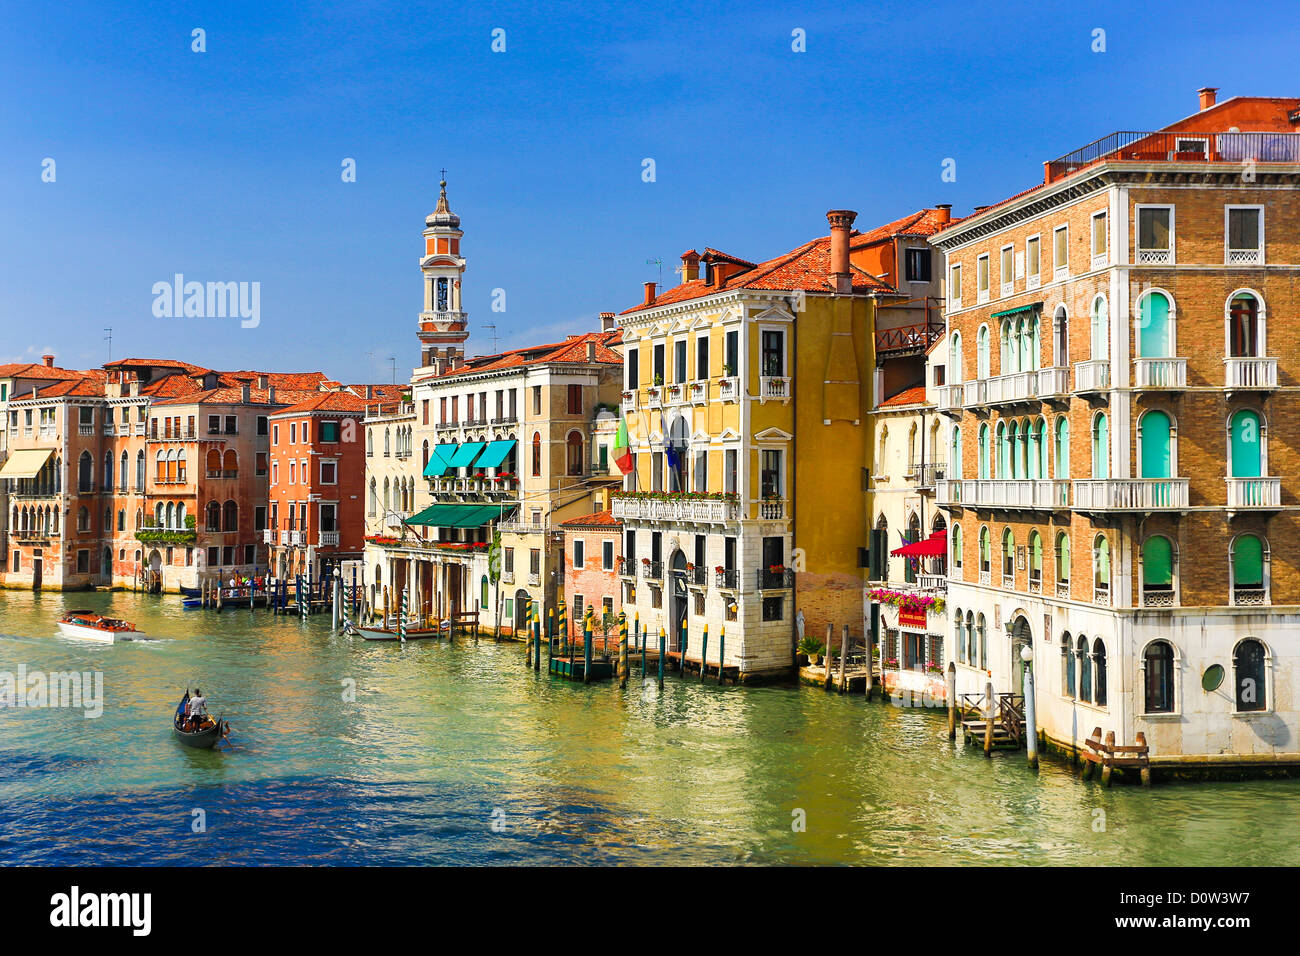 Bell Tower Of The Roman Catholic Church Of San Giovanni Elemosinario. Build  In Renaissance Architectural Style. View From Bridge Rialto. Venice, Italy  Stock Photo, Picture and Royalty Free Image. Image 37548061.